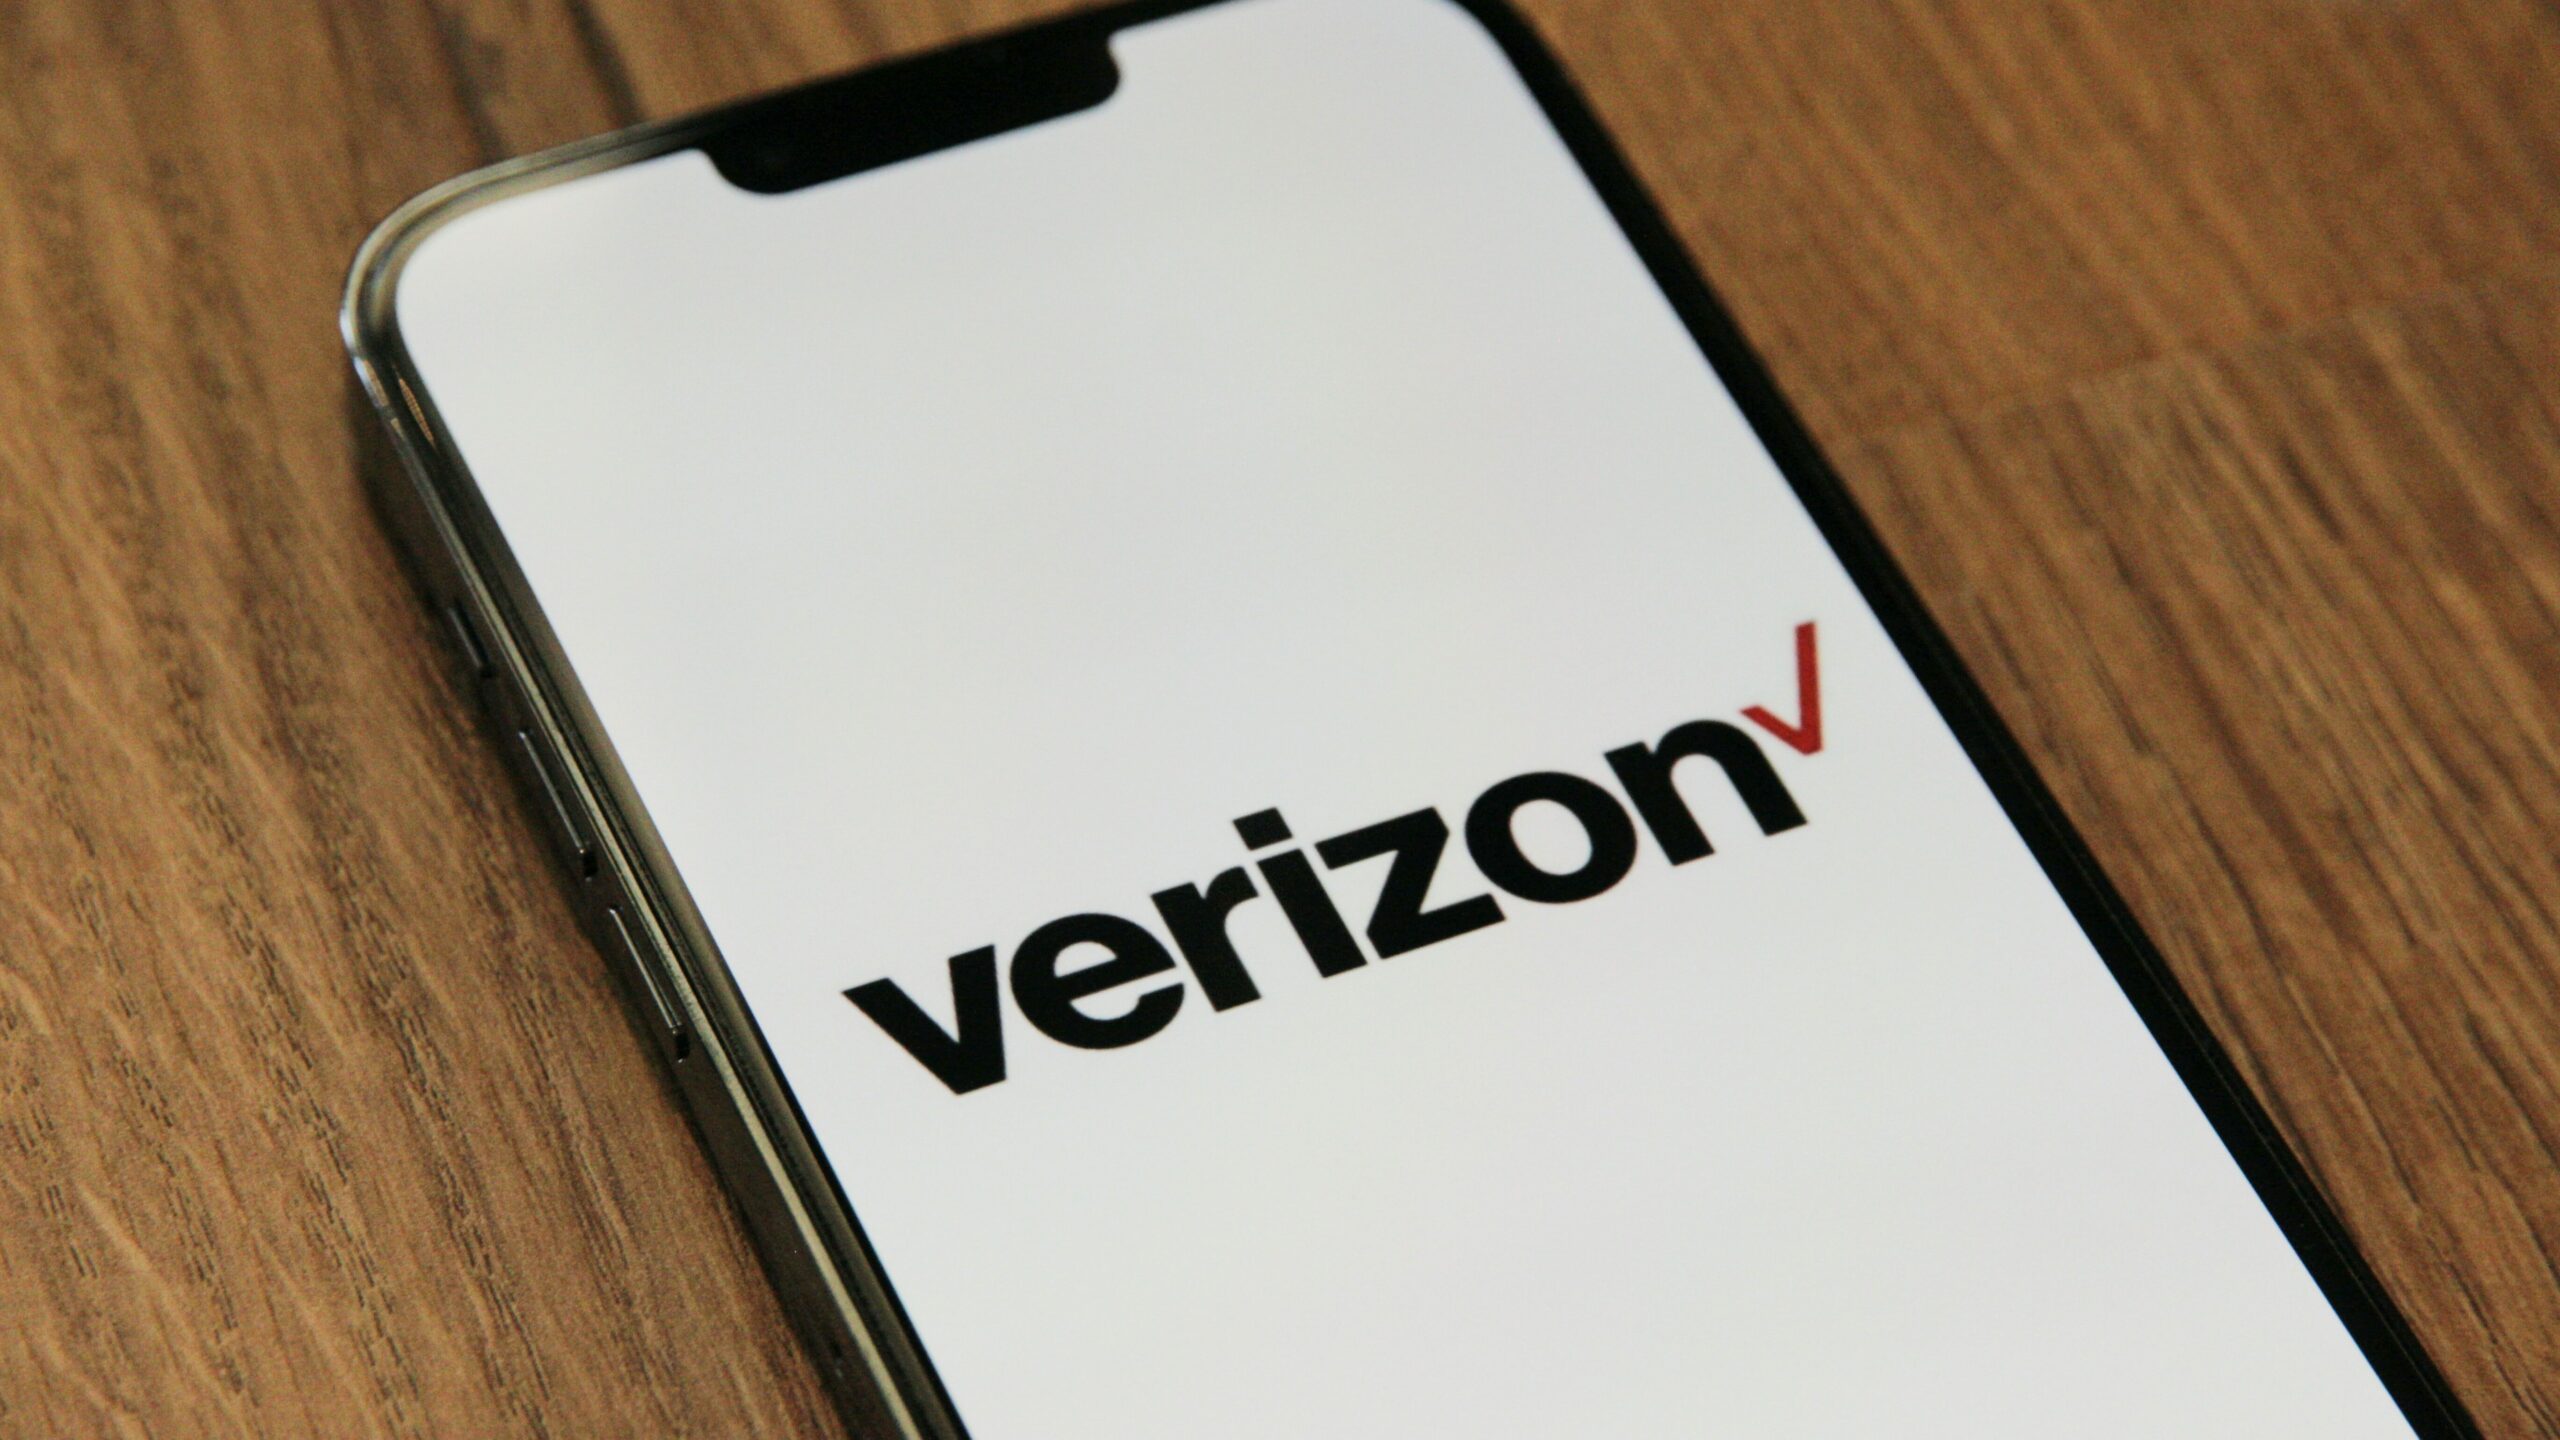 How do i force verizon carrier to update